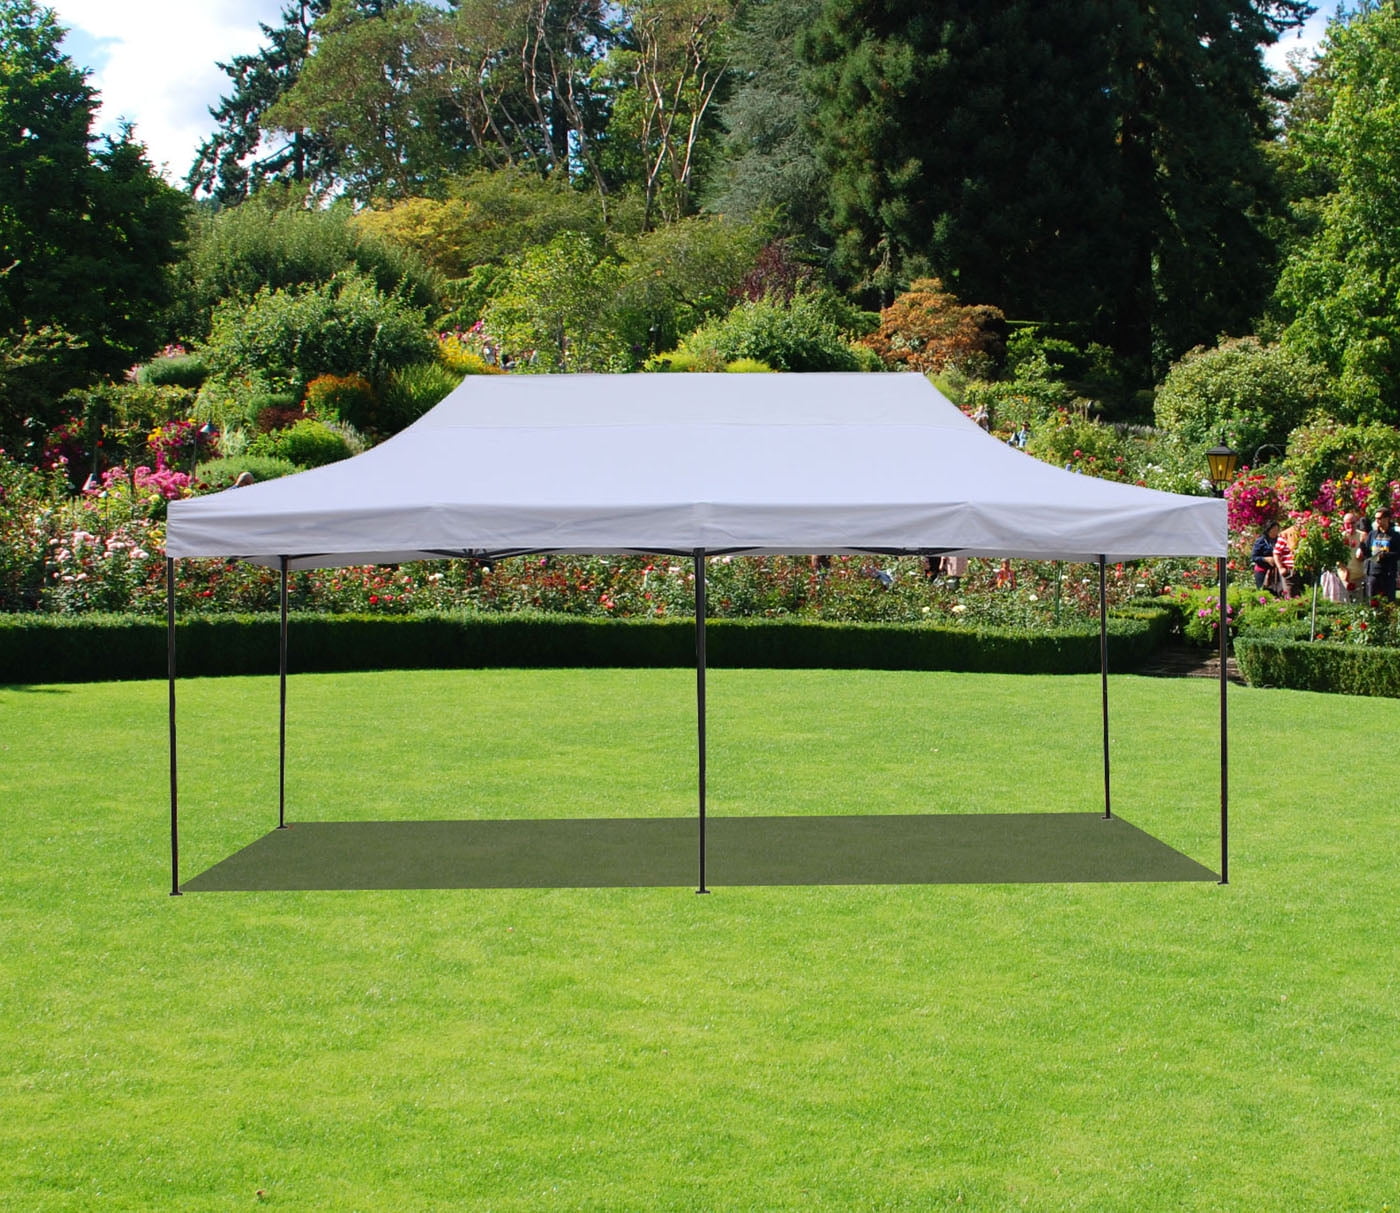 Canopy Tent 10 x 20 Commercial Fair Shelter Car Shelter Wedding Party ...